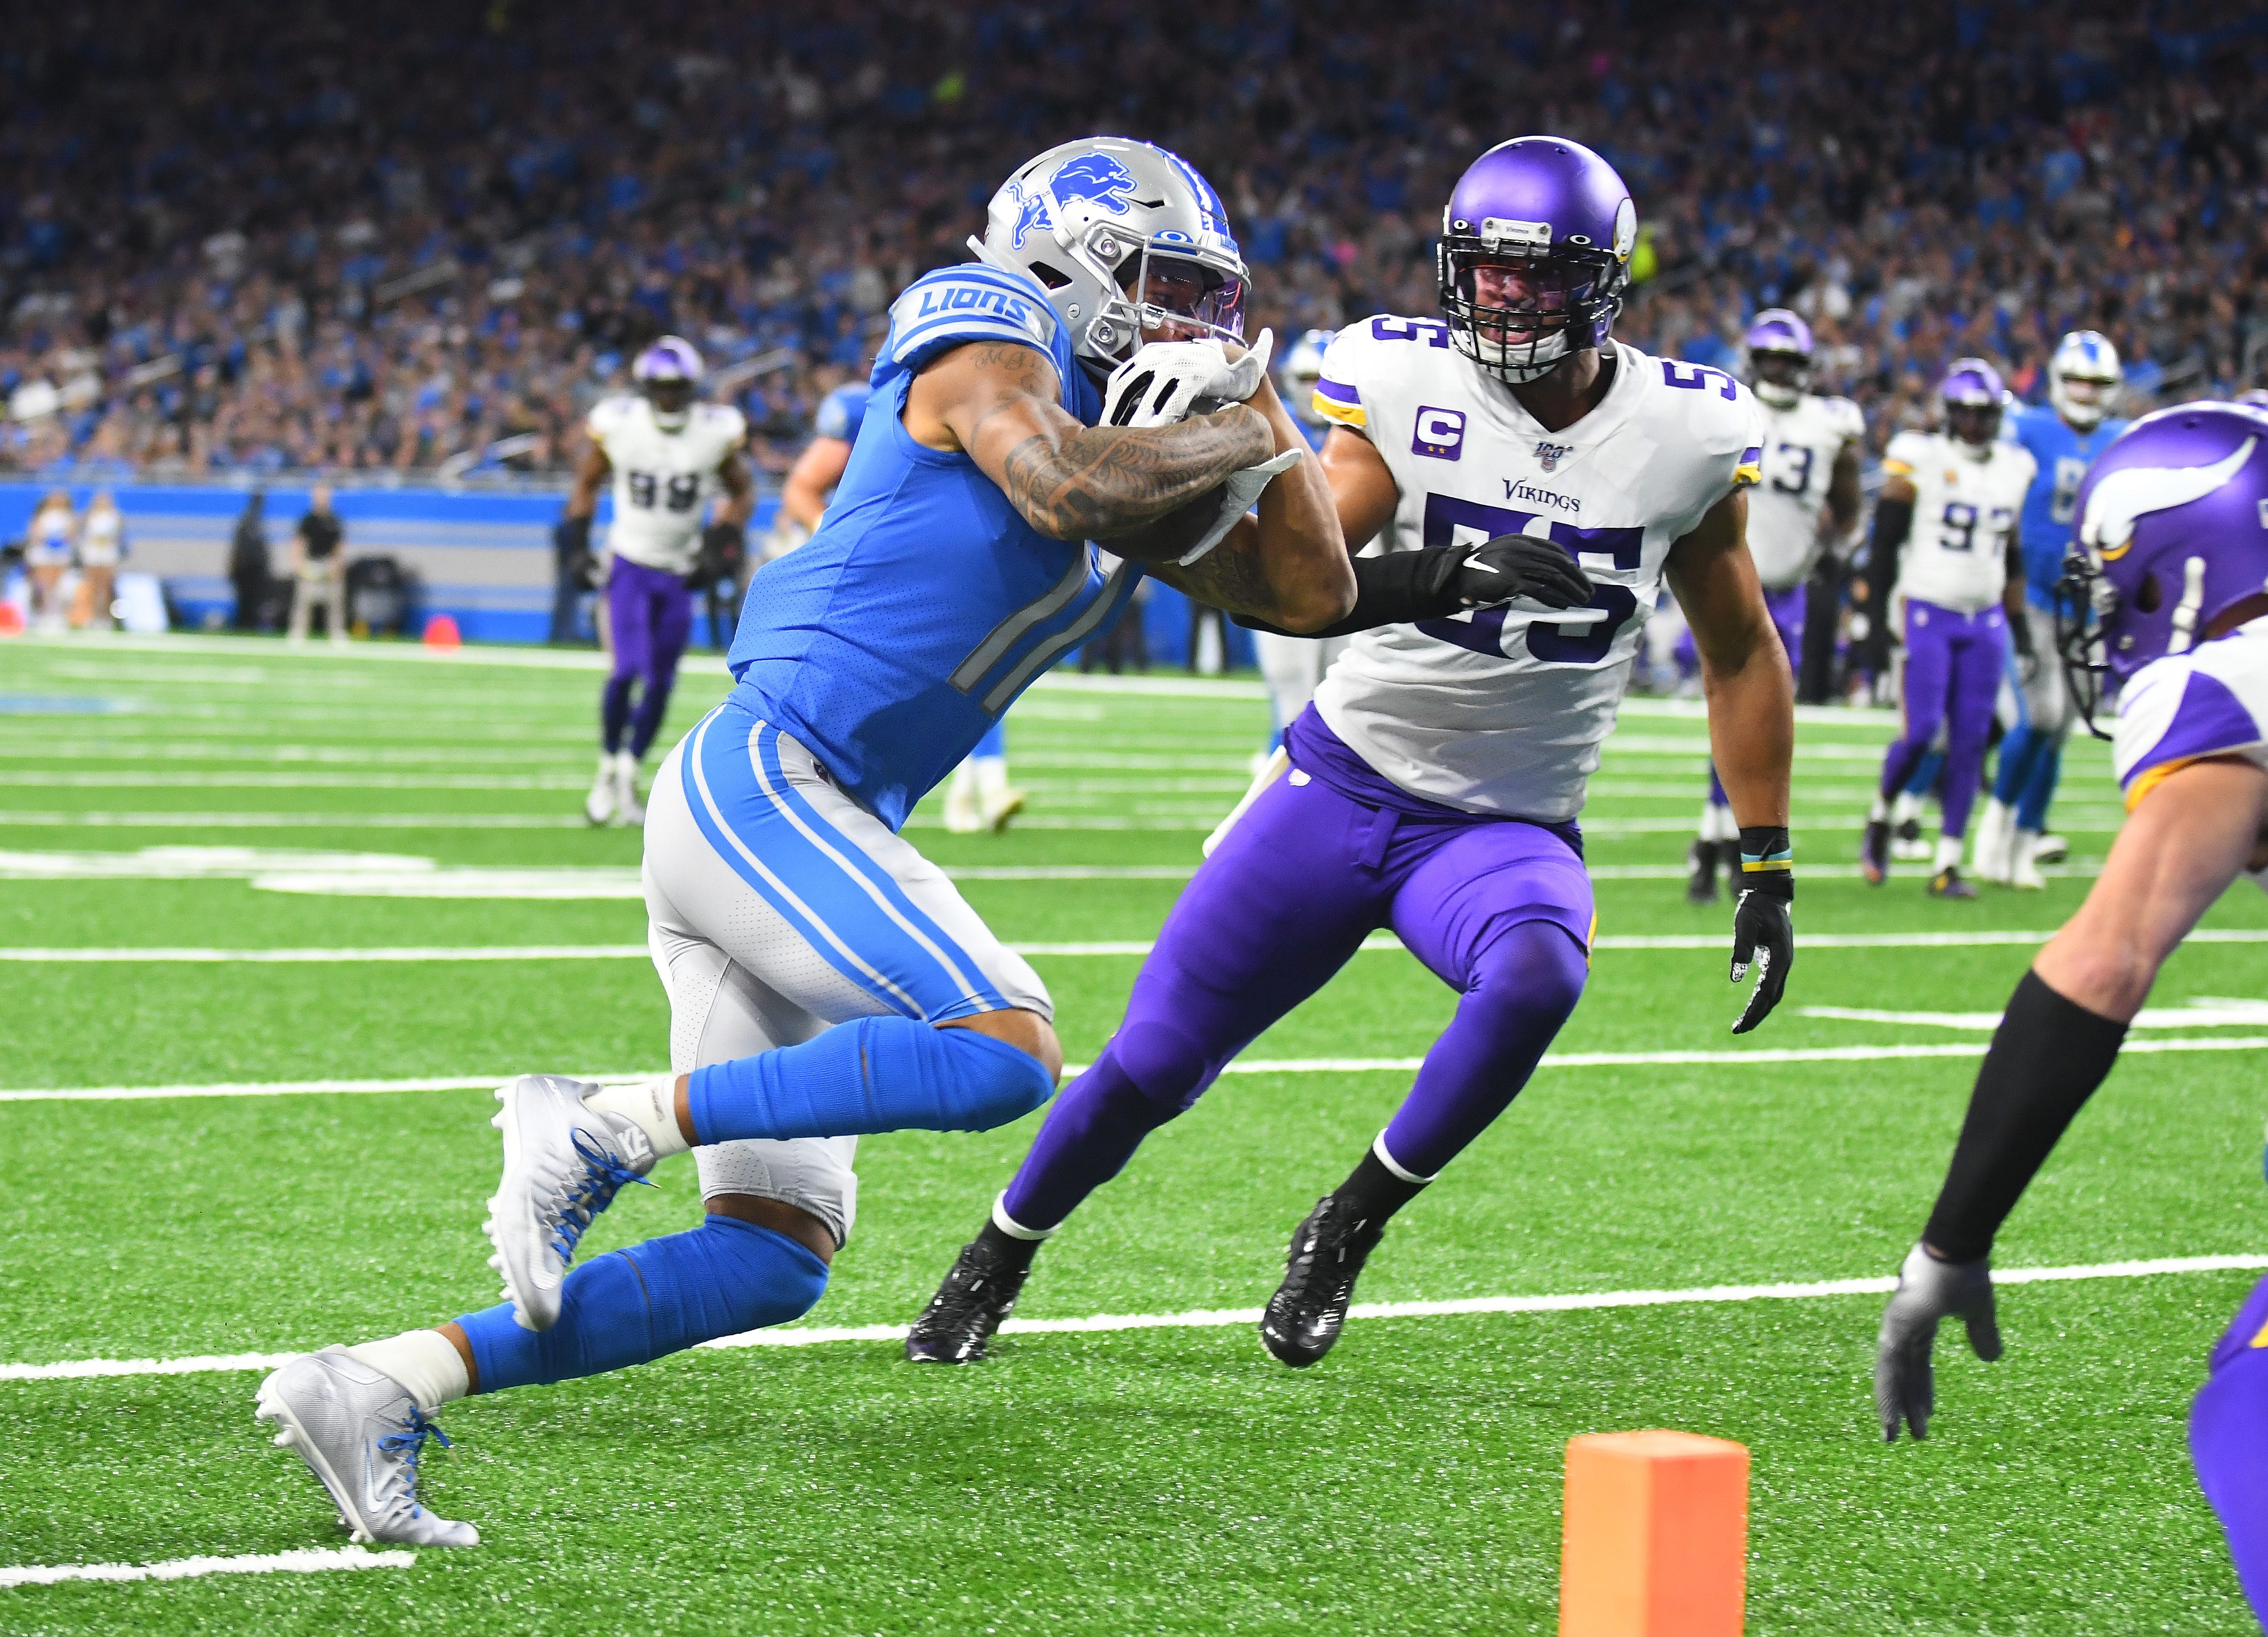 Lions ' Marvin Jones runs into the end zone after a reception for a touchdown past Vikings ' Anthony Barr in the first quarter.